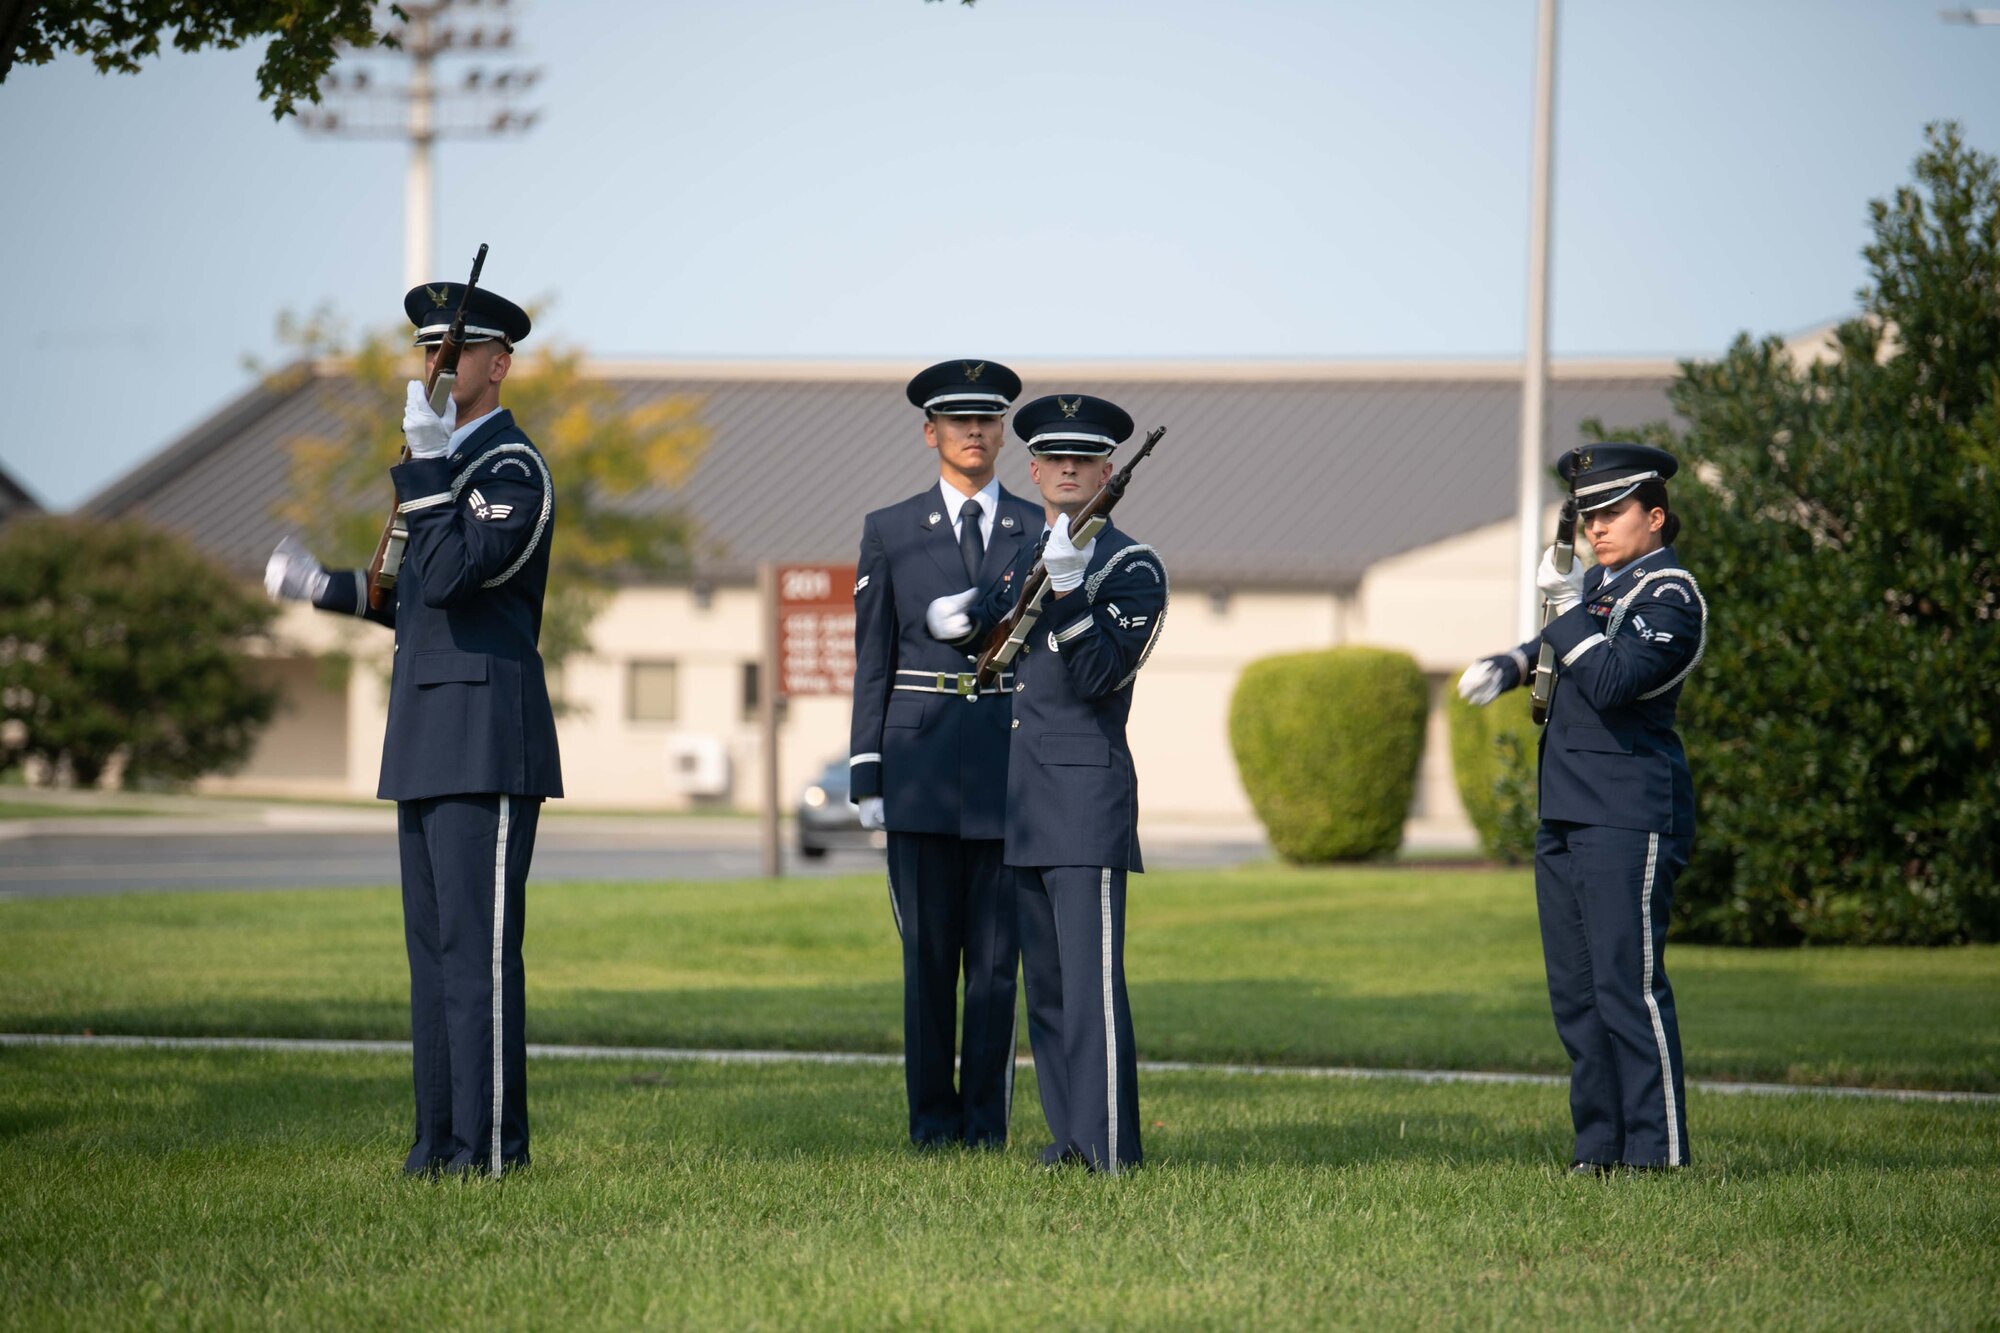 Dover Air Force Base Honor Guard members give a three volley salute during a retreat ceremony commemorating National POW/MIA Recognition Day on Dover AFB, Delaware, Sept. 16, 2022. The volley is an old battleground tradition in which the two warring sides would cease hostilities to clear their fallen from the battlefield. (U.S. Air Force photo by Senior Airman Faith Barron)